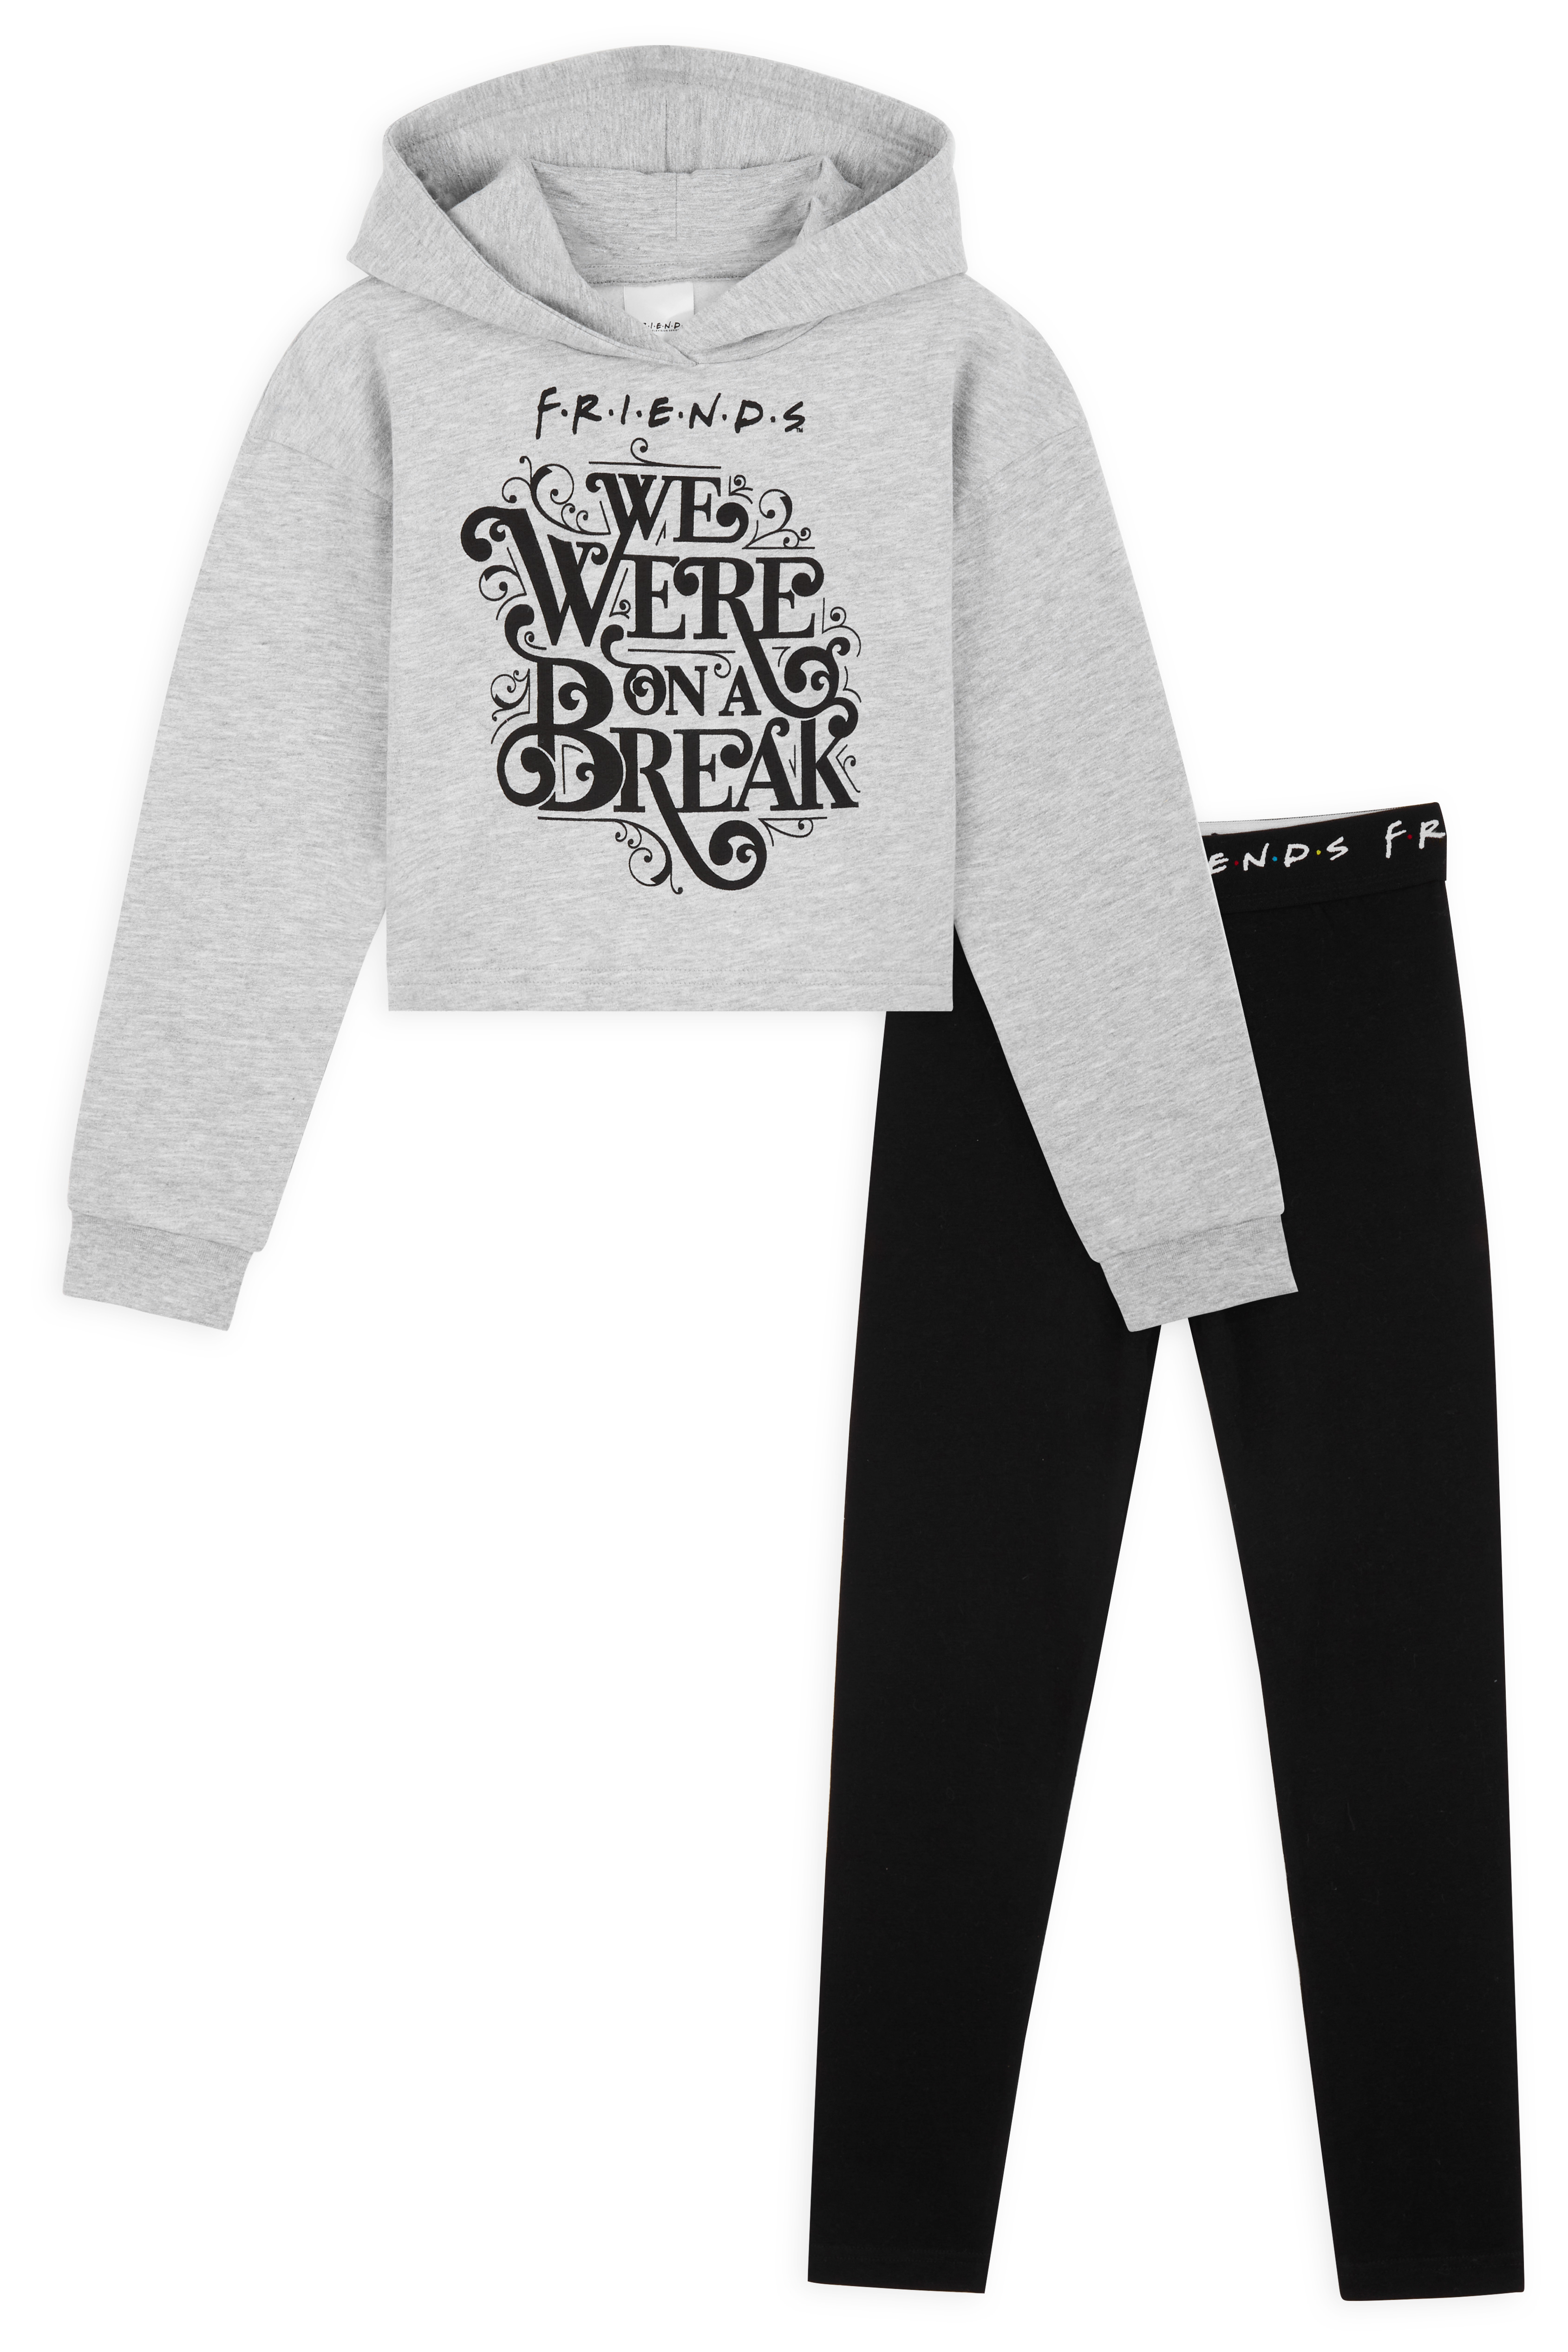 Friends Girls Tracksuit, Crop Top Hoodie and Leggings, Clothes for Teenage  Girls